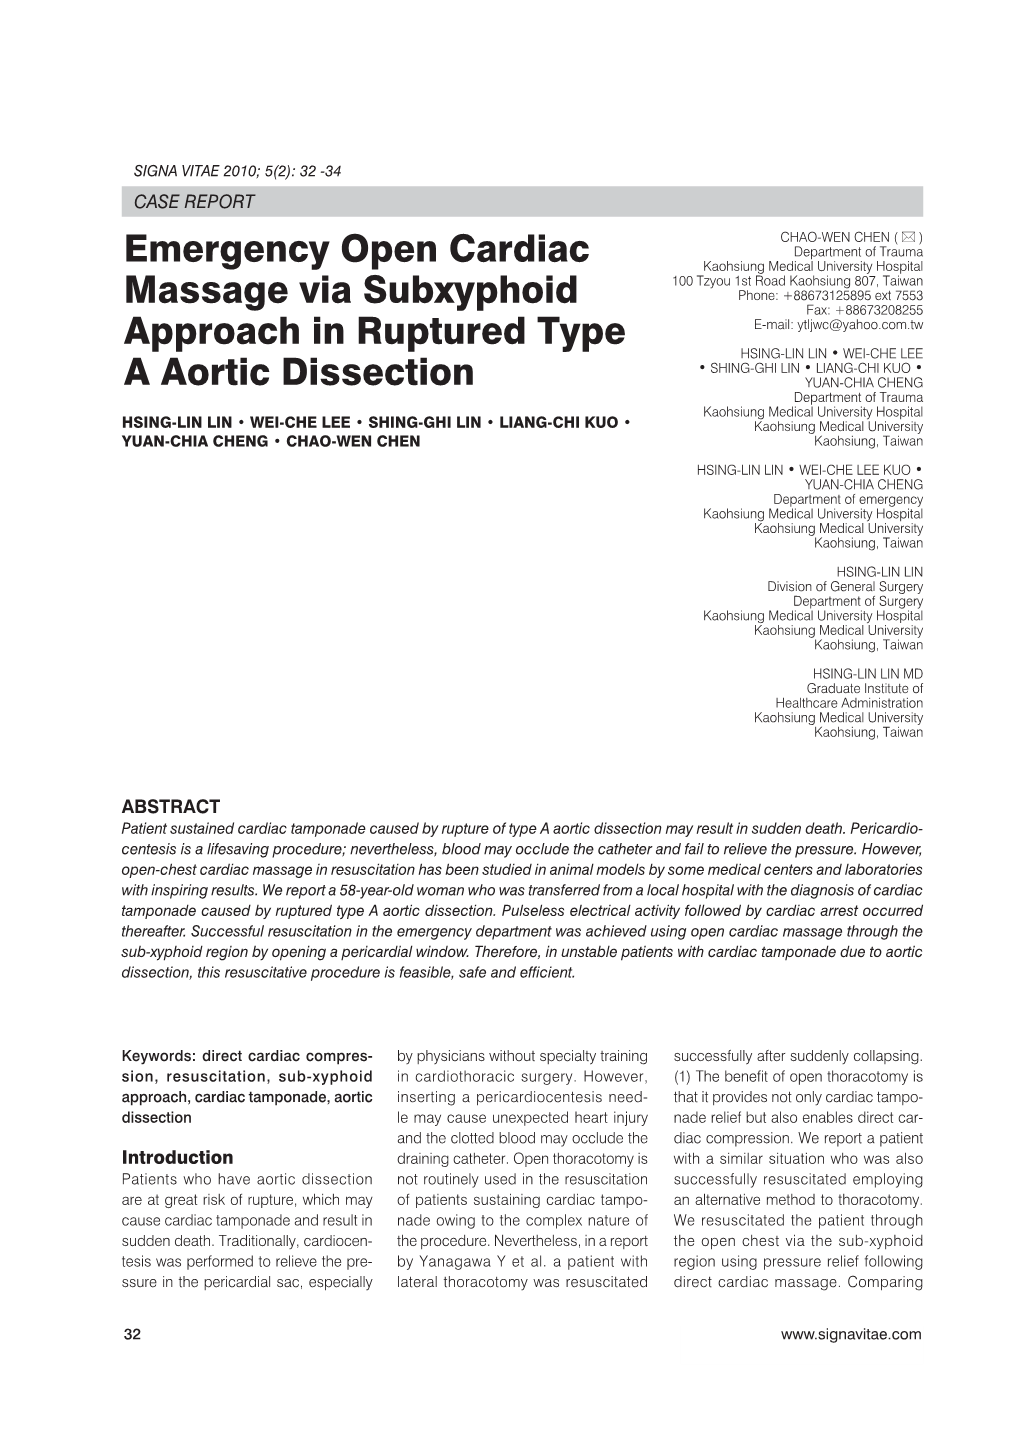 Emergency Open Cardiac Massage Via Subxyphoid Approach in Ruptured Type a Aortic Dissection